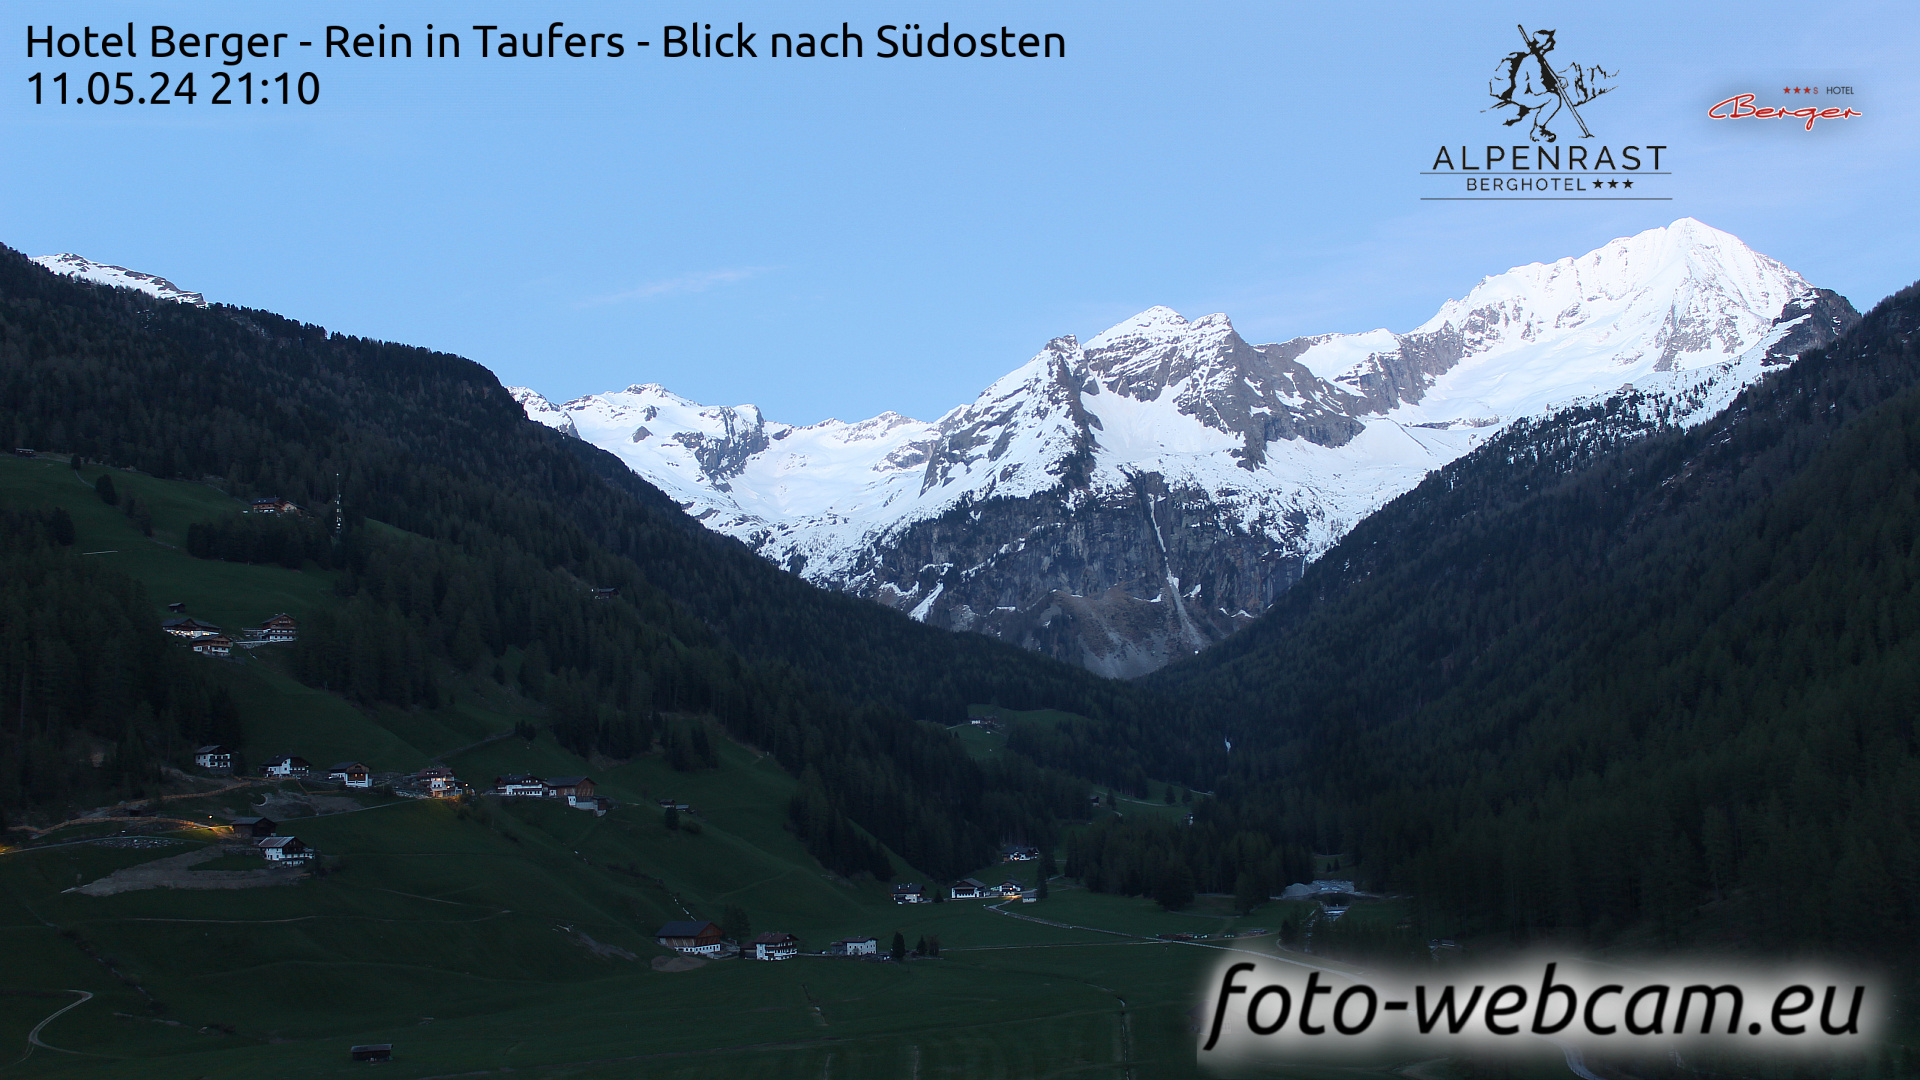 Rein in Taufers Do. 21:11